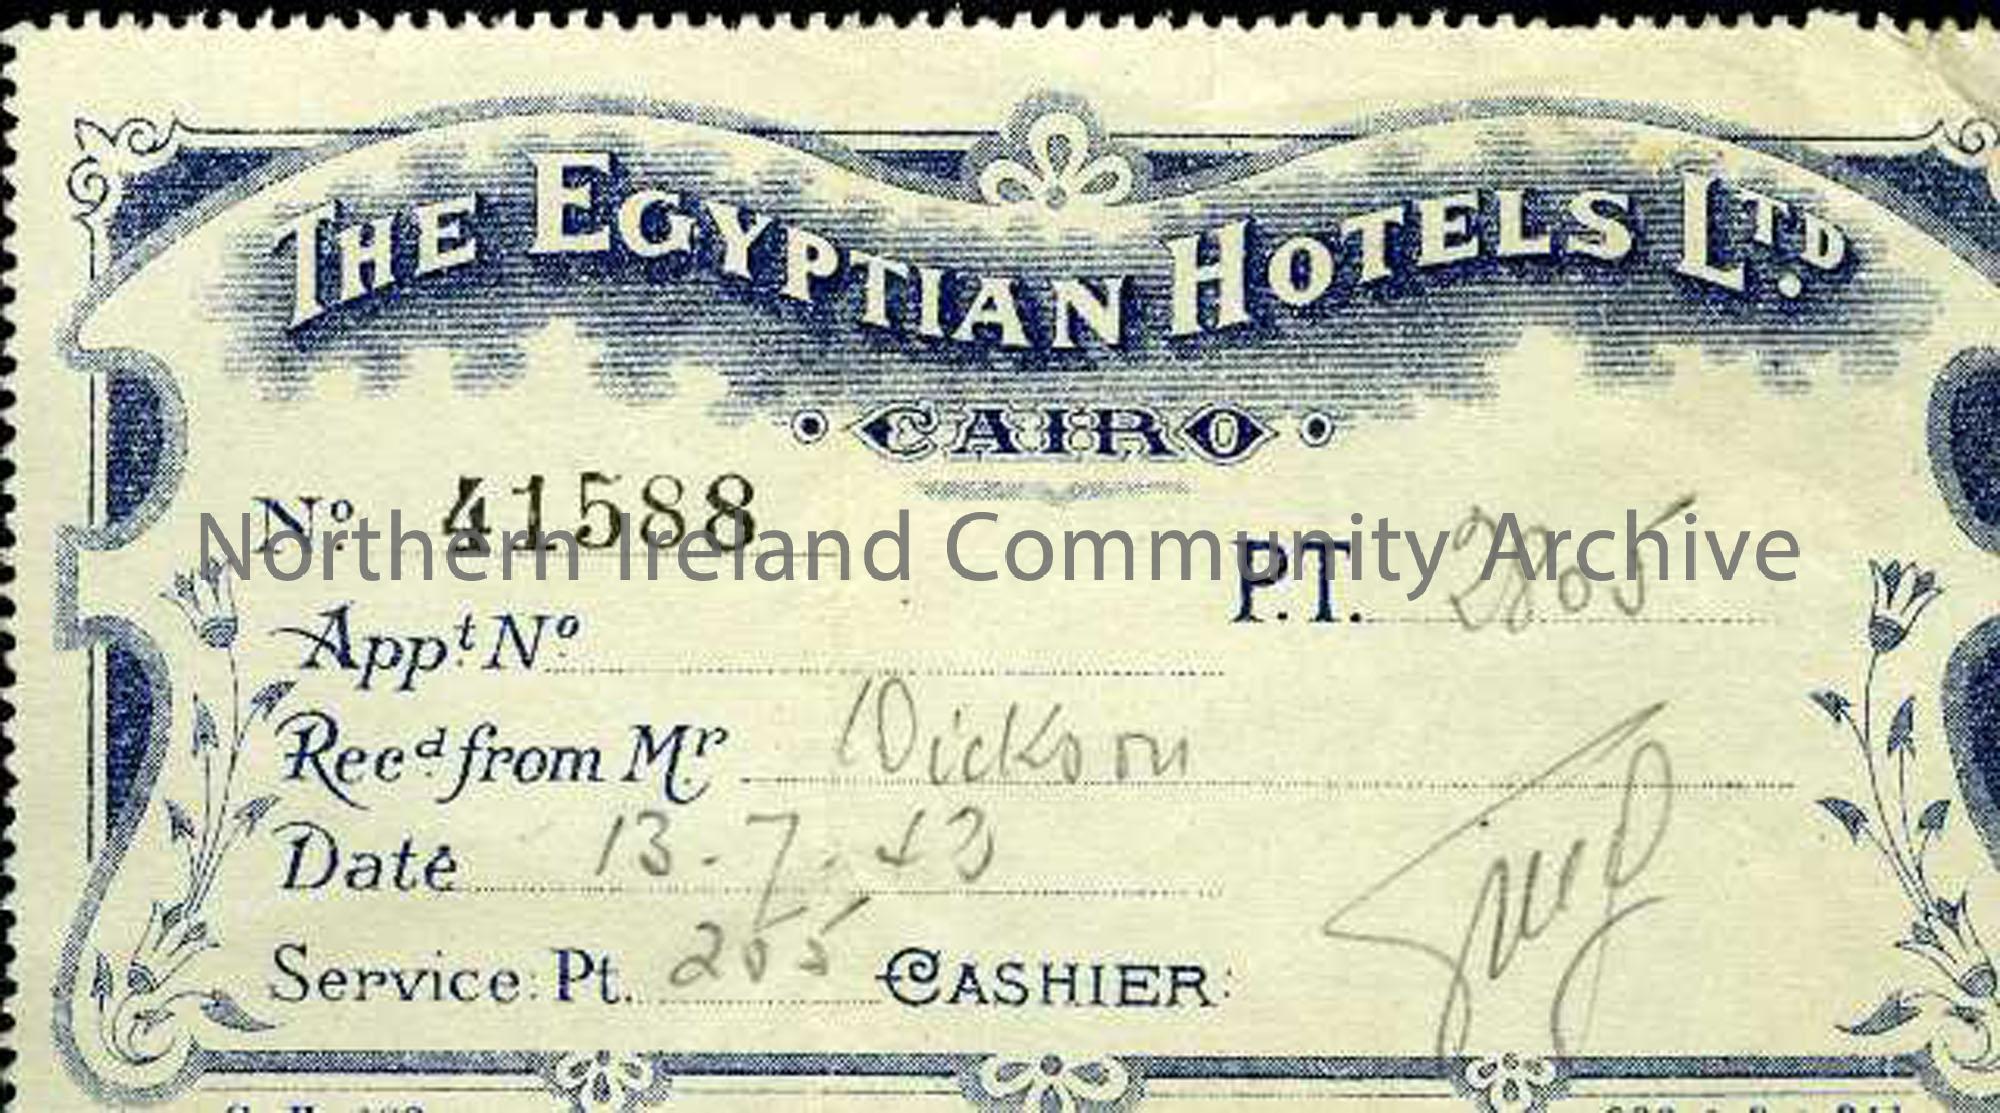 Ticket for the Egyptian Hotel, Cairo